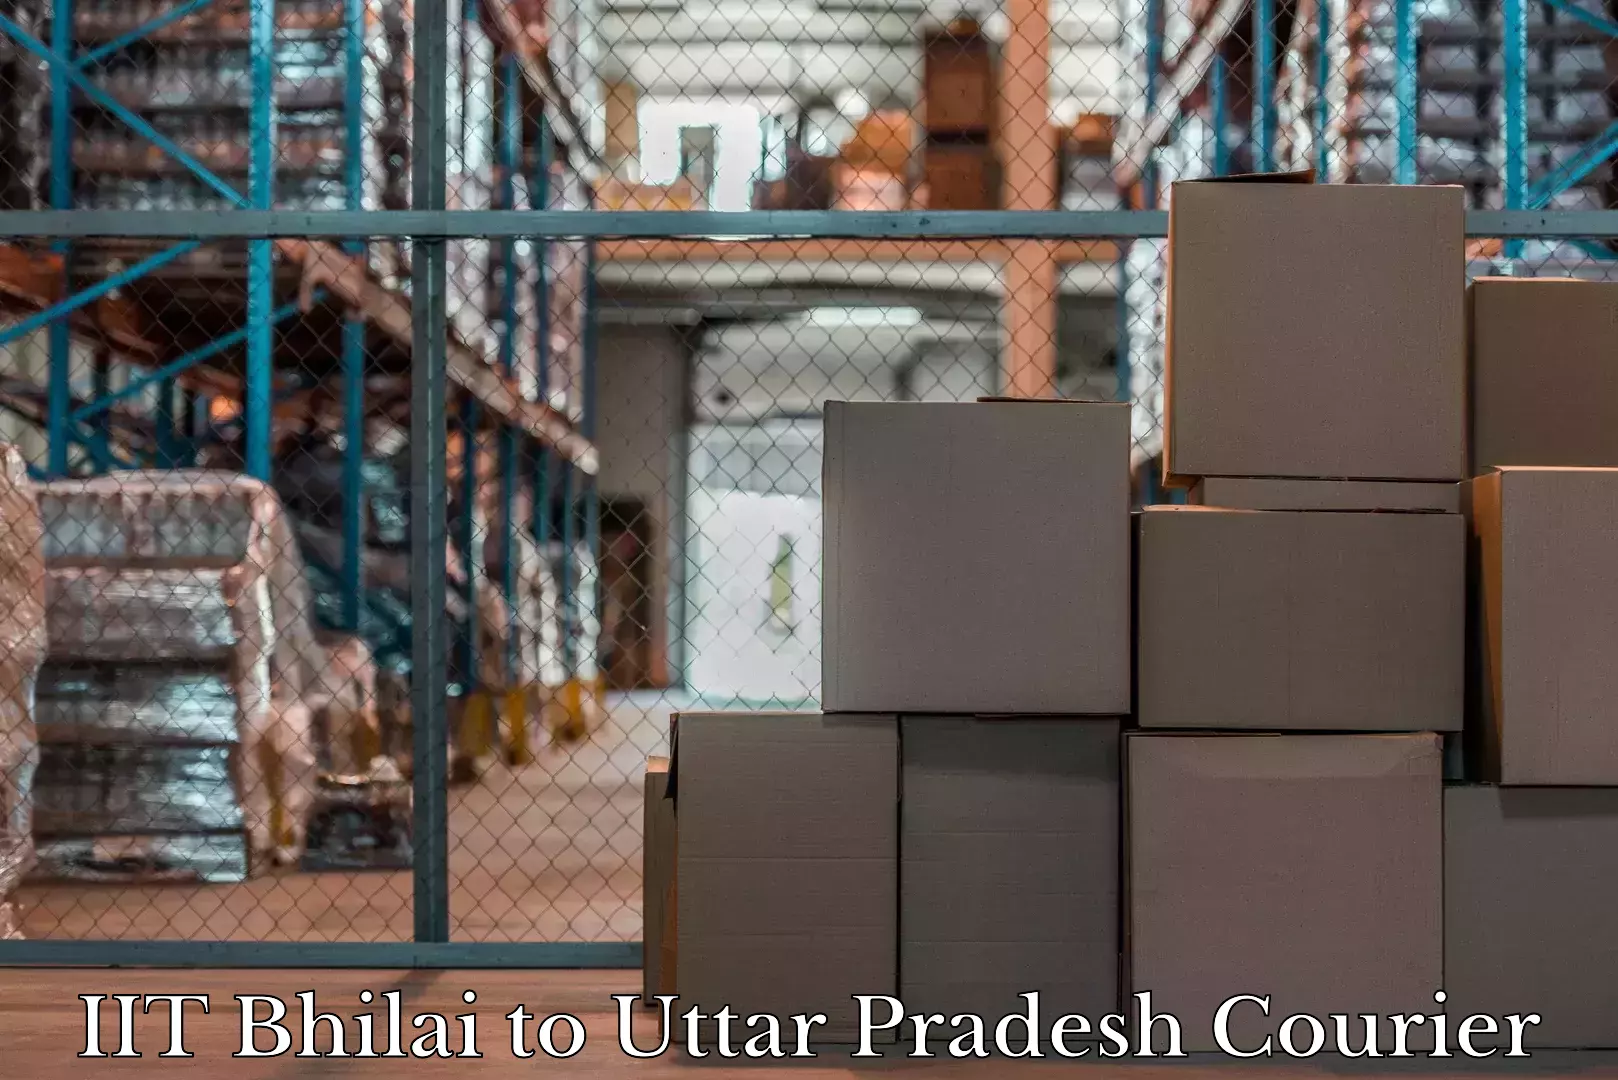 Instant baggage transport quote IIT Bhilai to Pihani